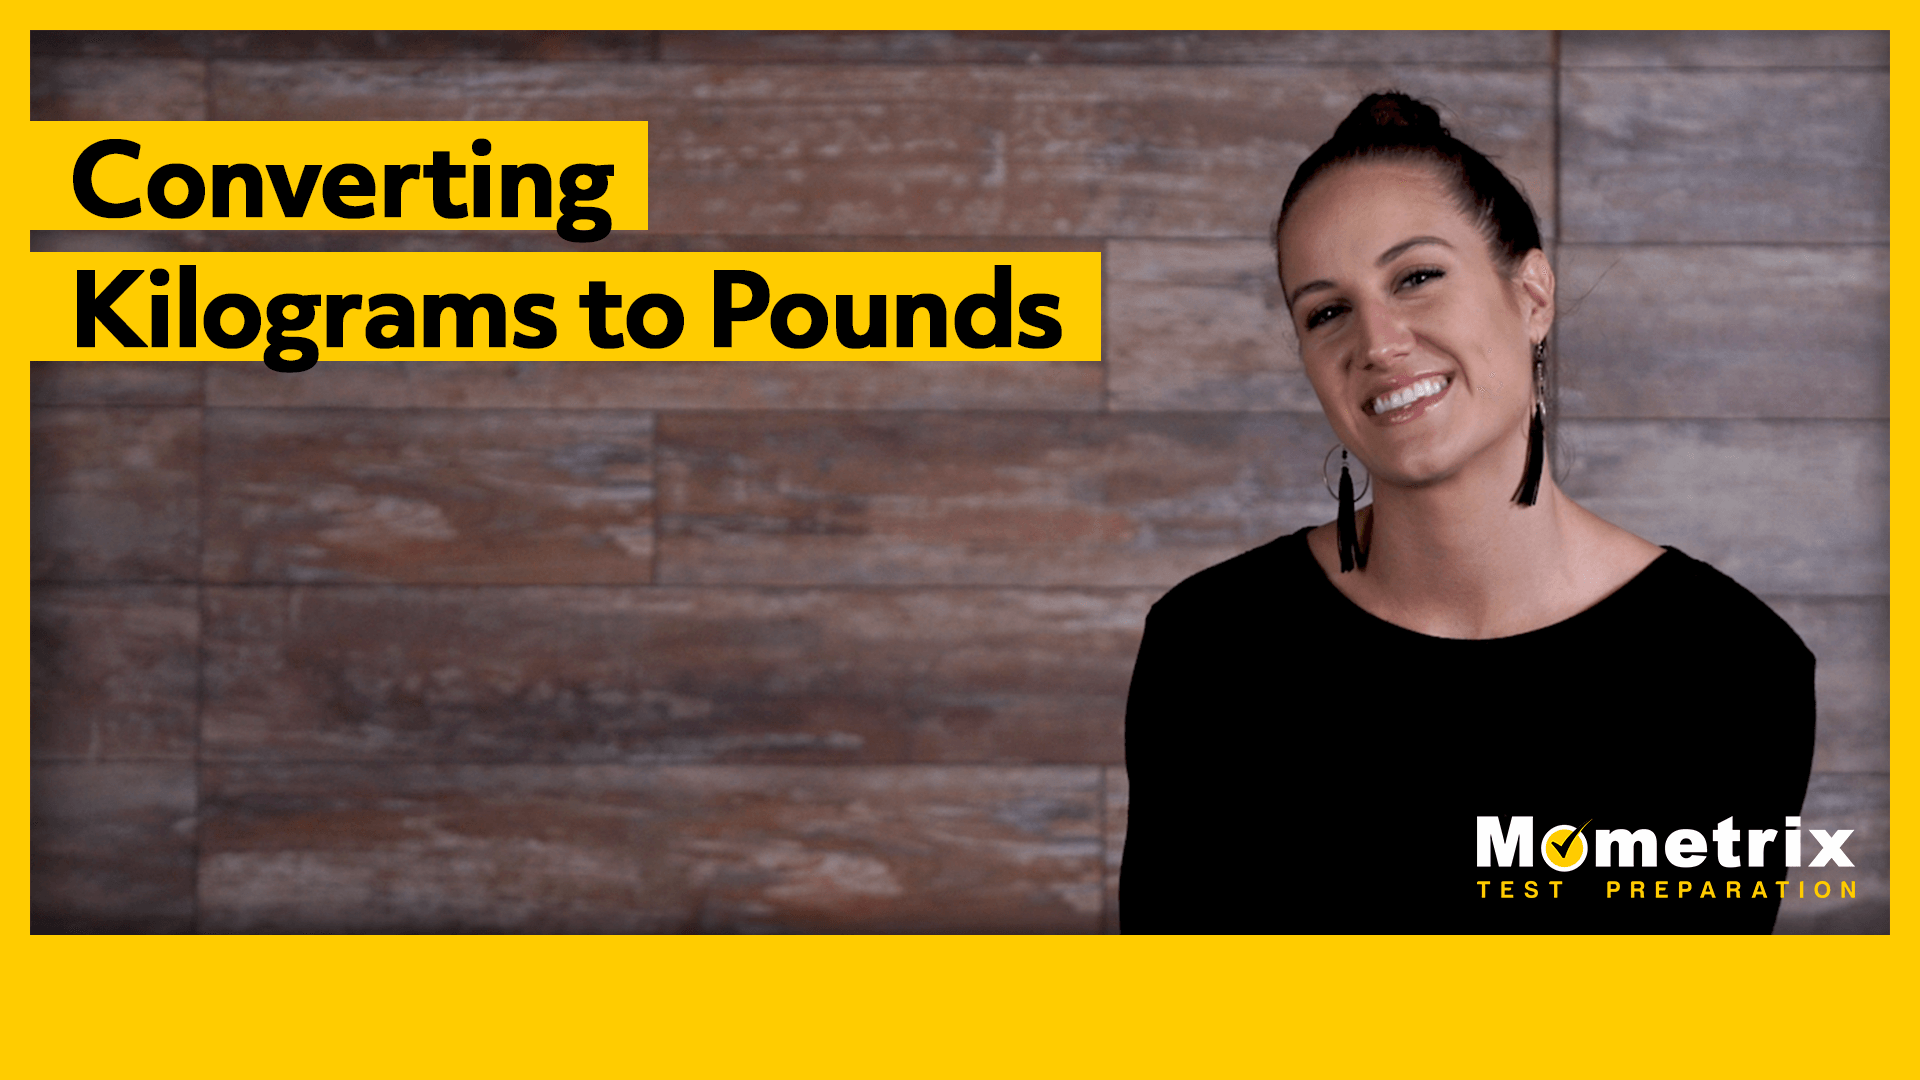 How to Convert Kilograms to Pounds (Video & Practice)